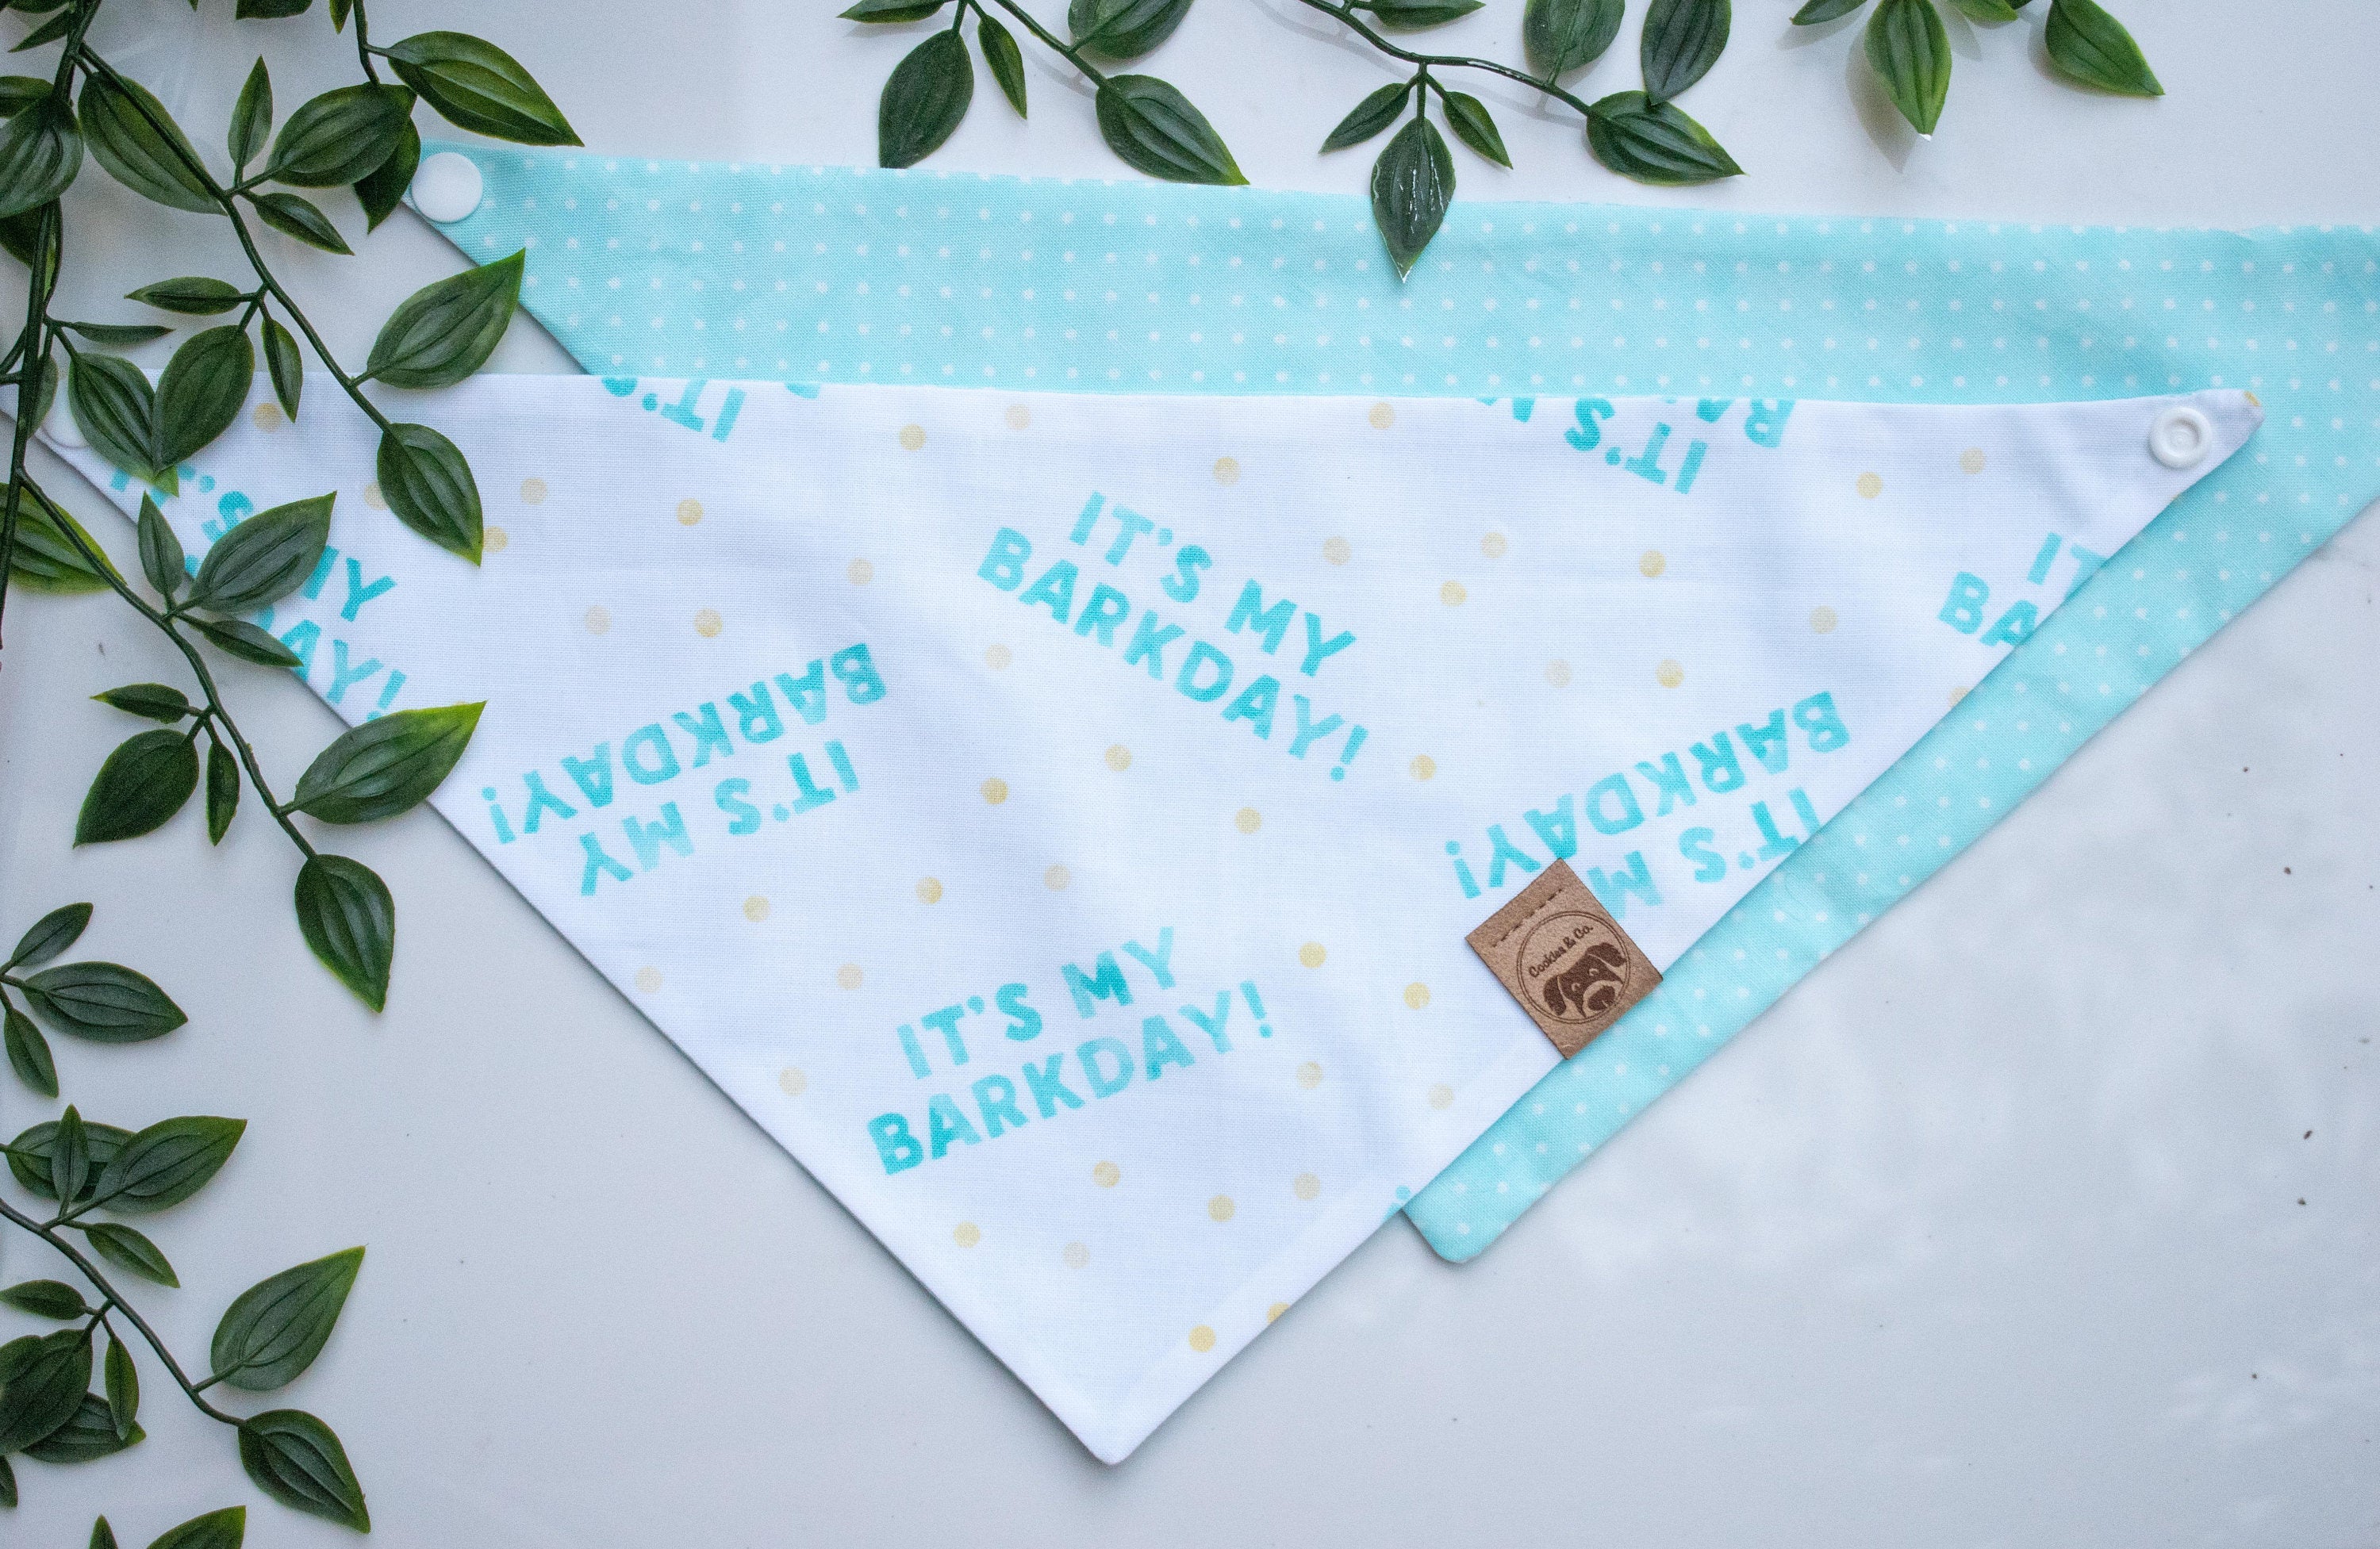 Reversible Gotcha and Dip N' Dots bandana print, with one side featuring a repeating pattern of 'Its My Gotcha Day' slogan and a pink cupcake in a light blue cupcake baking cup with a white bone icon on a white background, and the other side featuring white mini polka dot print on a light blue background